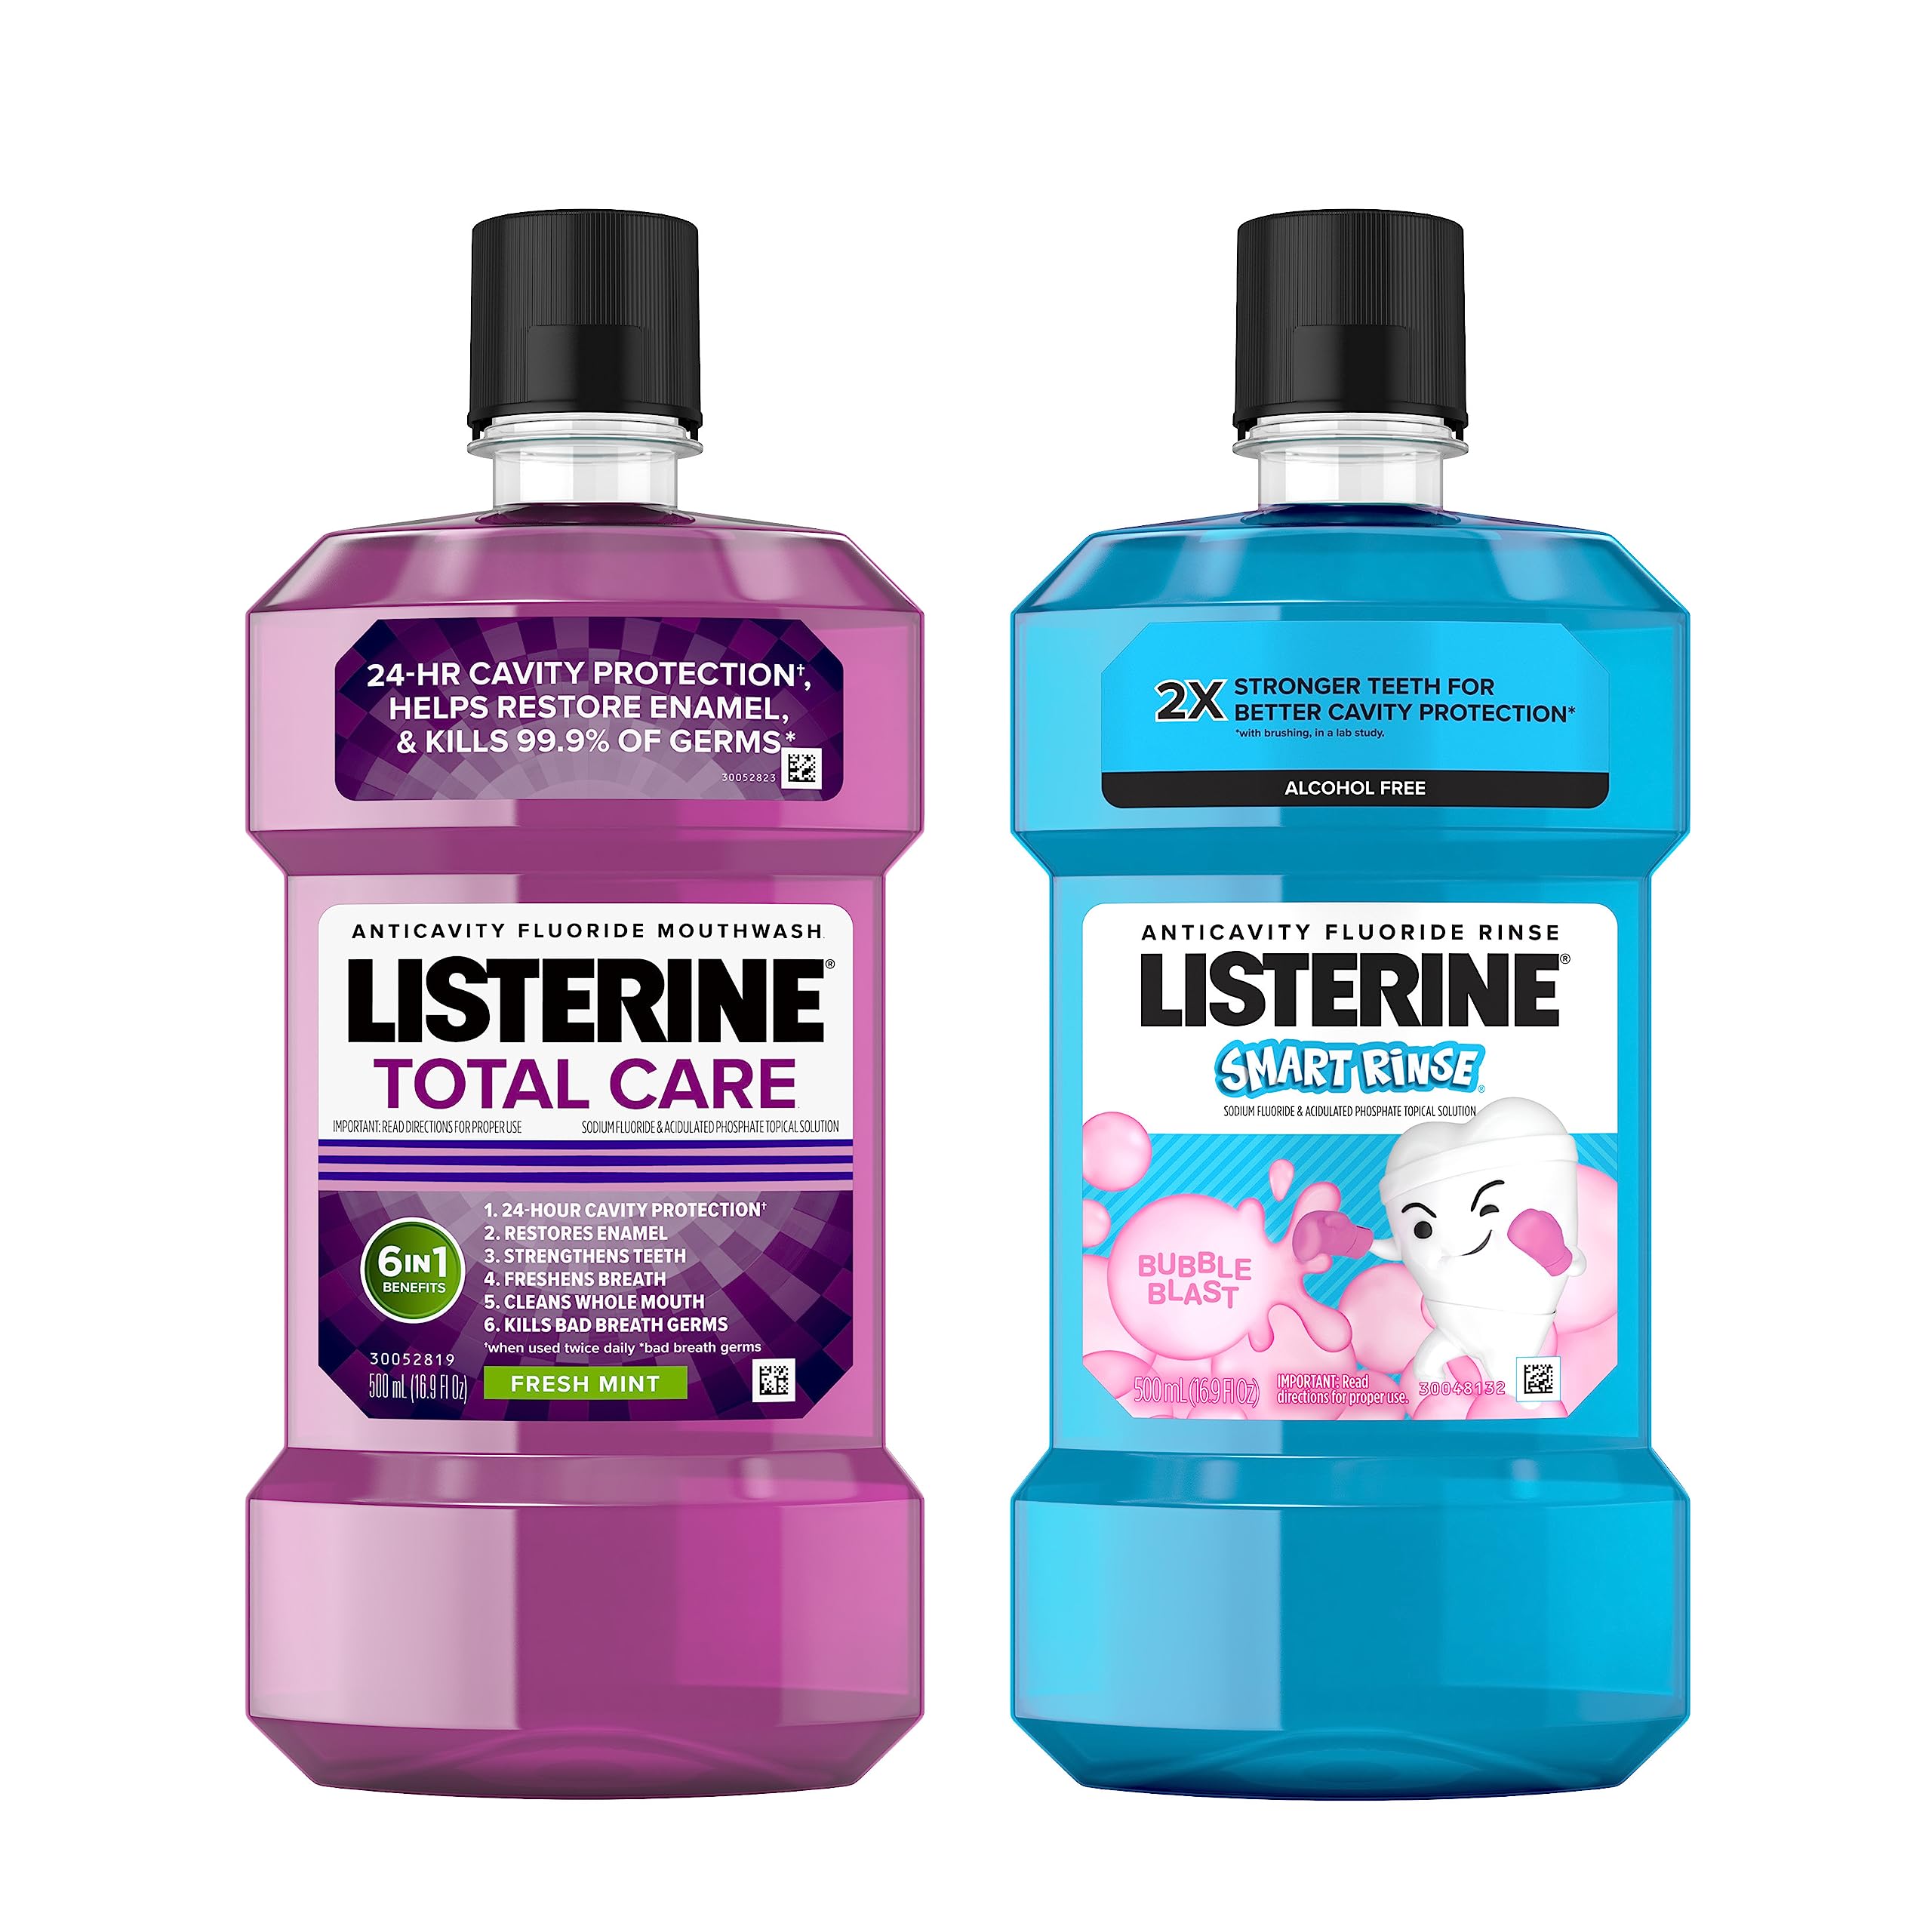 Listerine Total Care Fresh Mint Anticavity Fluoride Mouthwash for Adults and Smart Rinse Alcohol-Free Anticavity Sodium Fluoride Bubble Gum Mouthwash for Kids, Convenience Pack, 2 x 500 mL